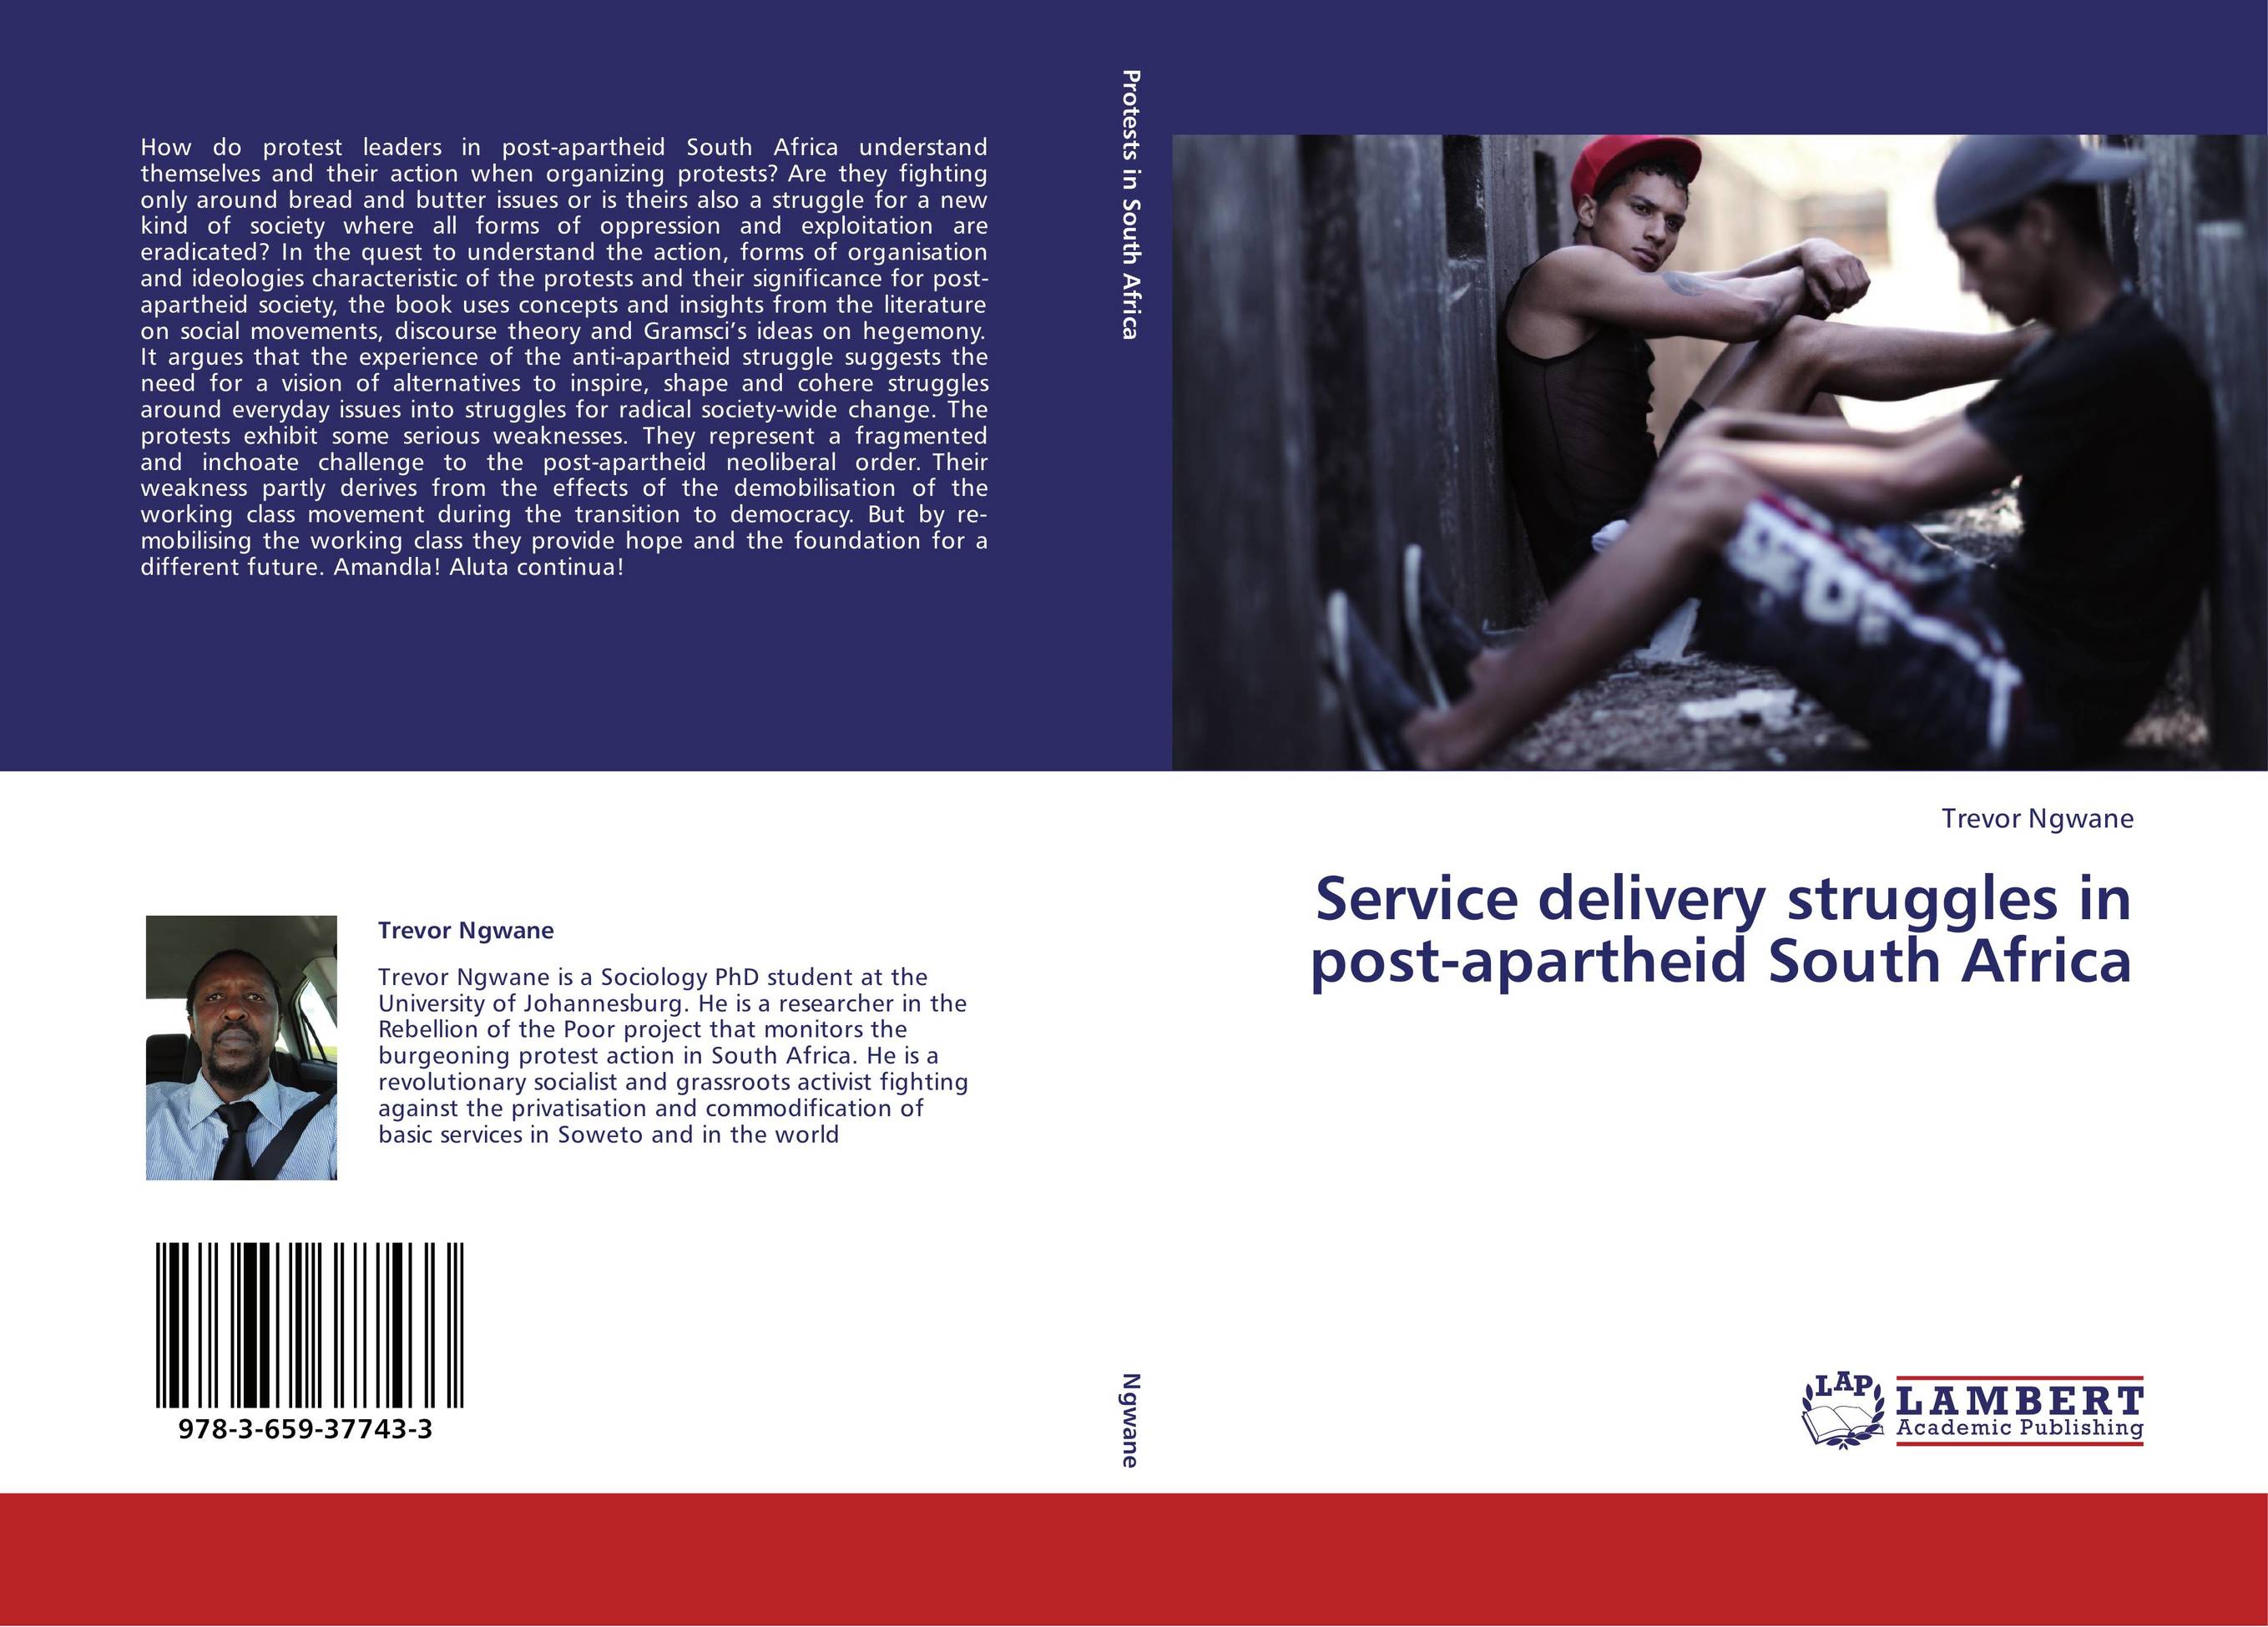 Pdf Relationships, Intimacy And Desire In The Lives Of Lesbian, Gay And Bisexual Youth In South Africa